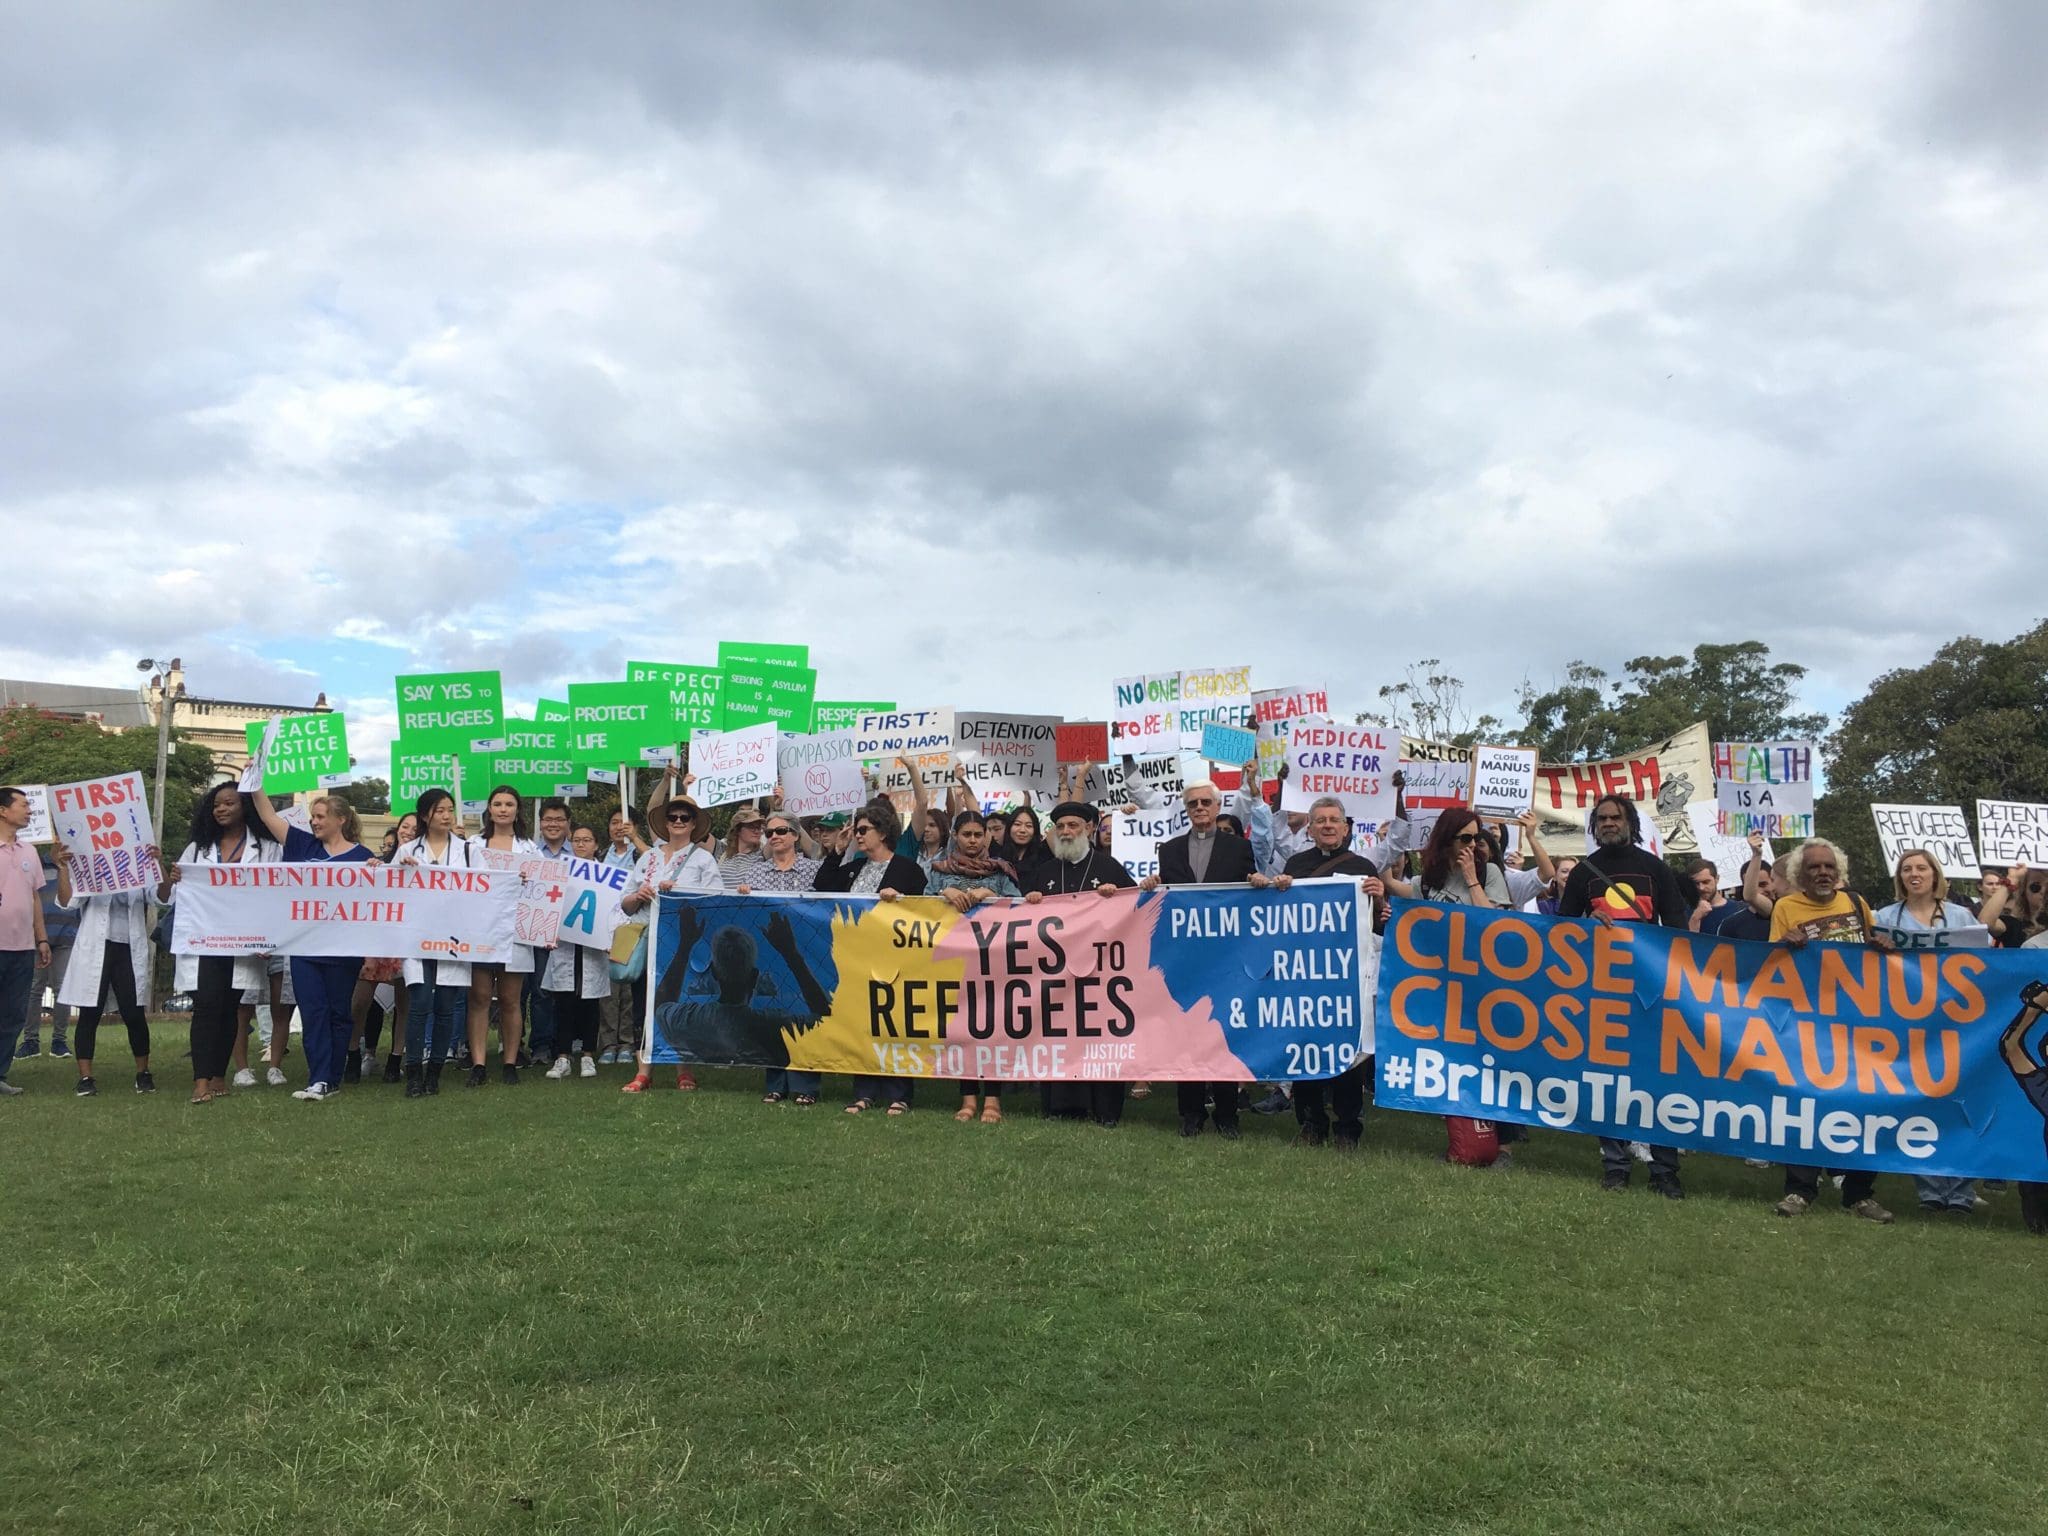 Crowd from the Palm Sunday Rally, holding banners that read "Say yes to refugees" and "Close Manus Close Nauru #Bringthemhere"